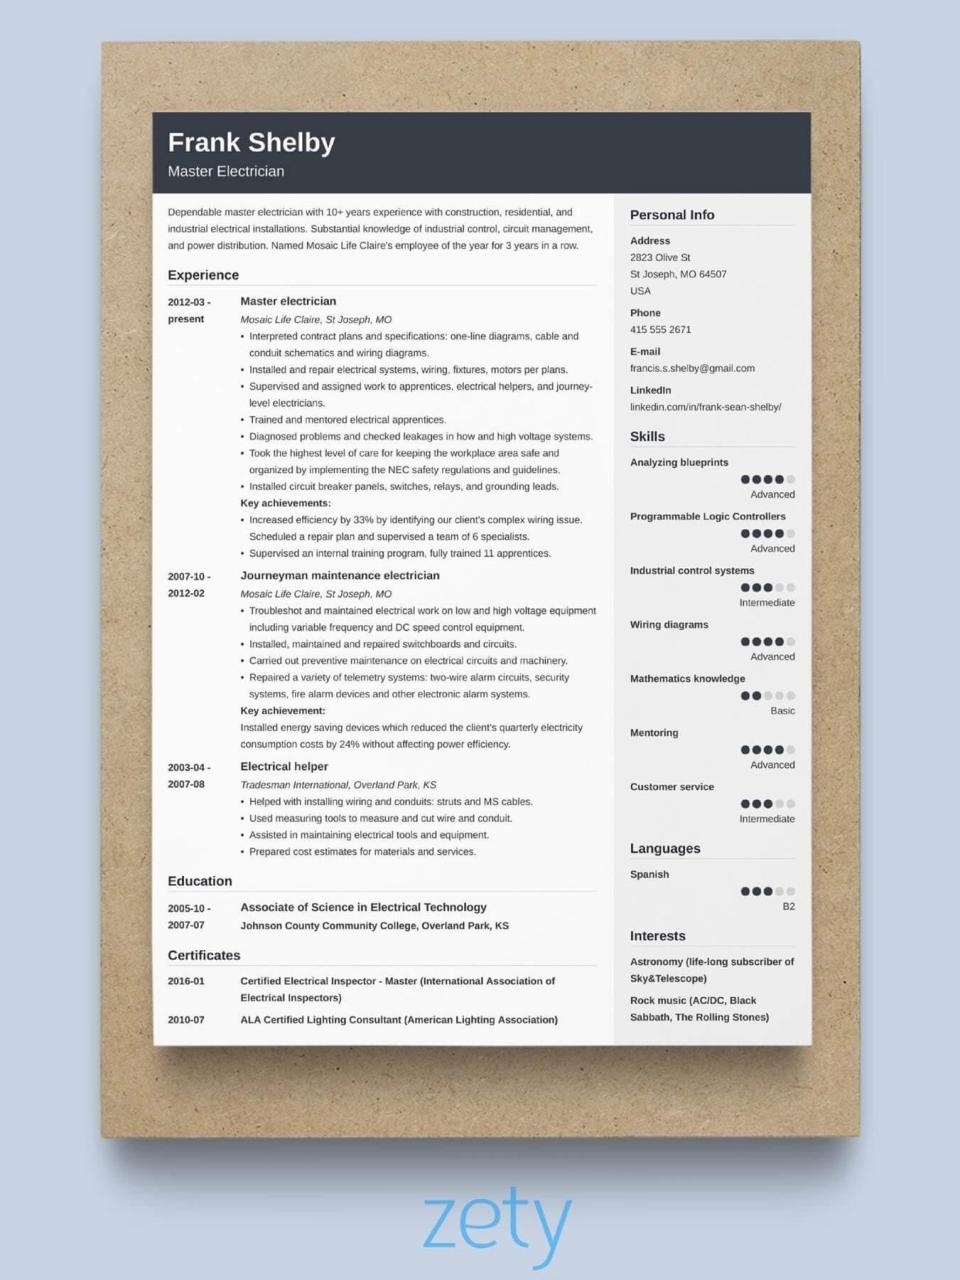 Which Format Do Most Employers Prefer For Resumés